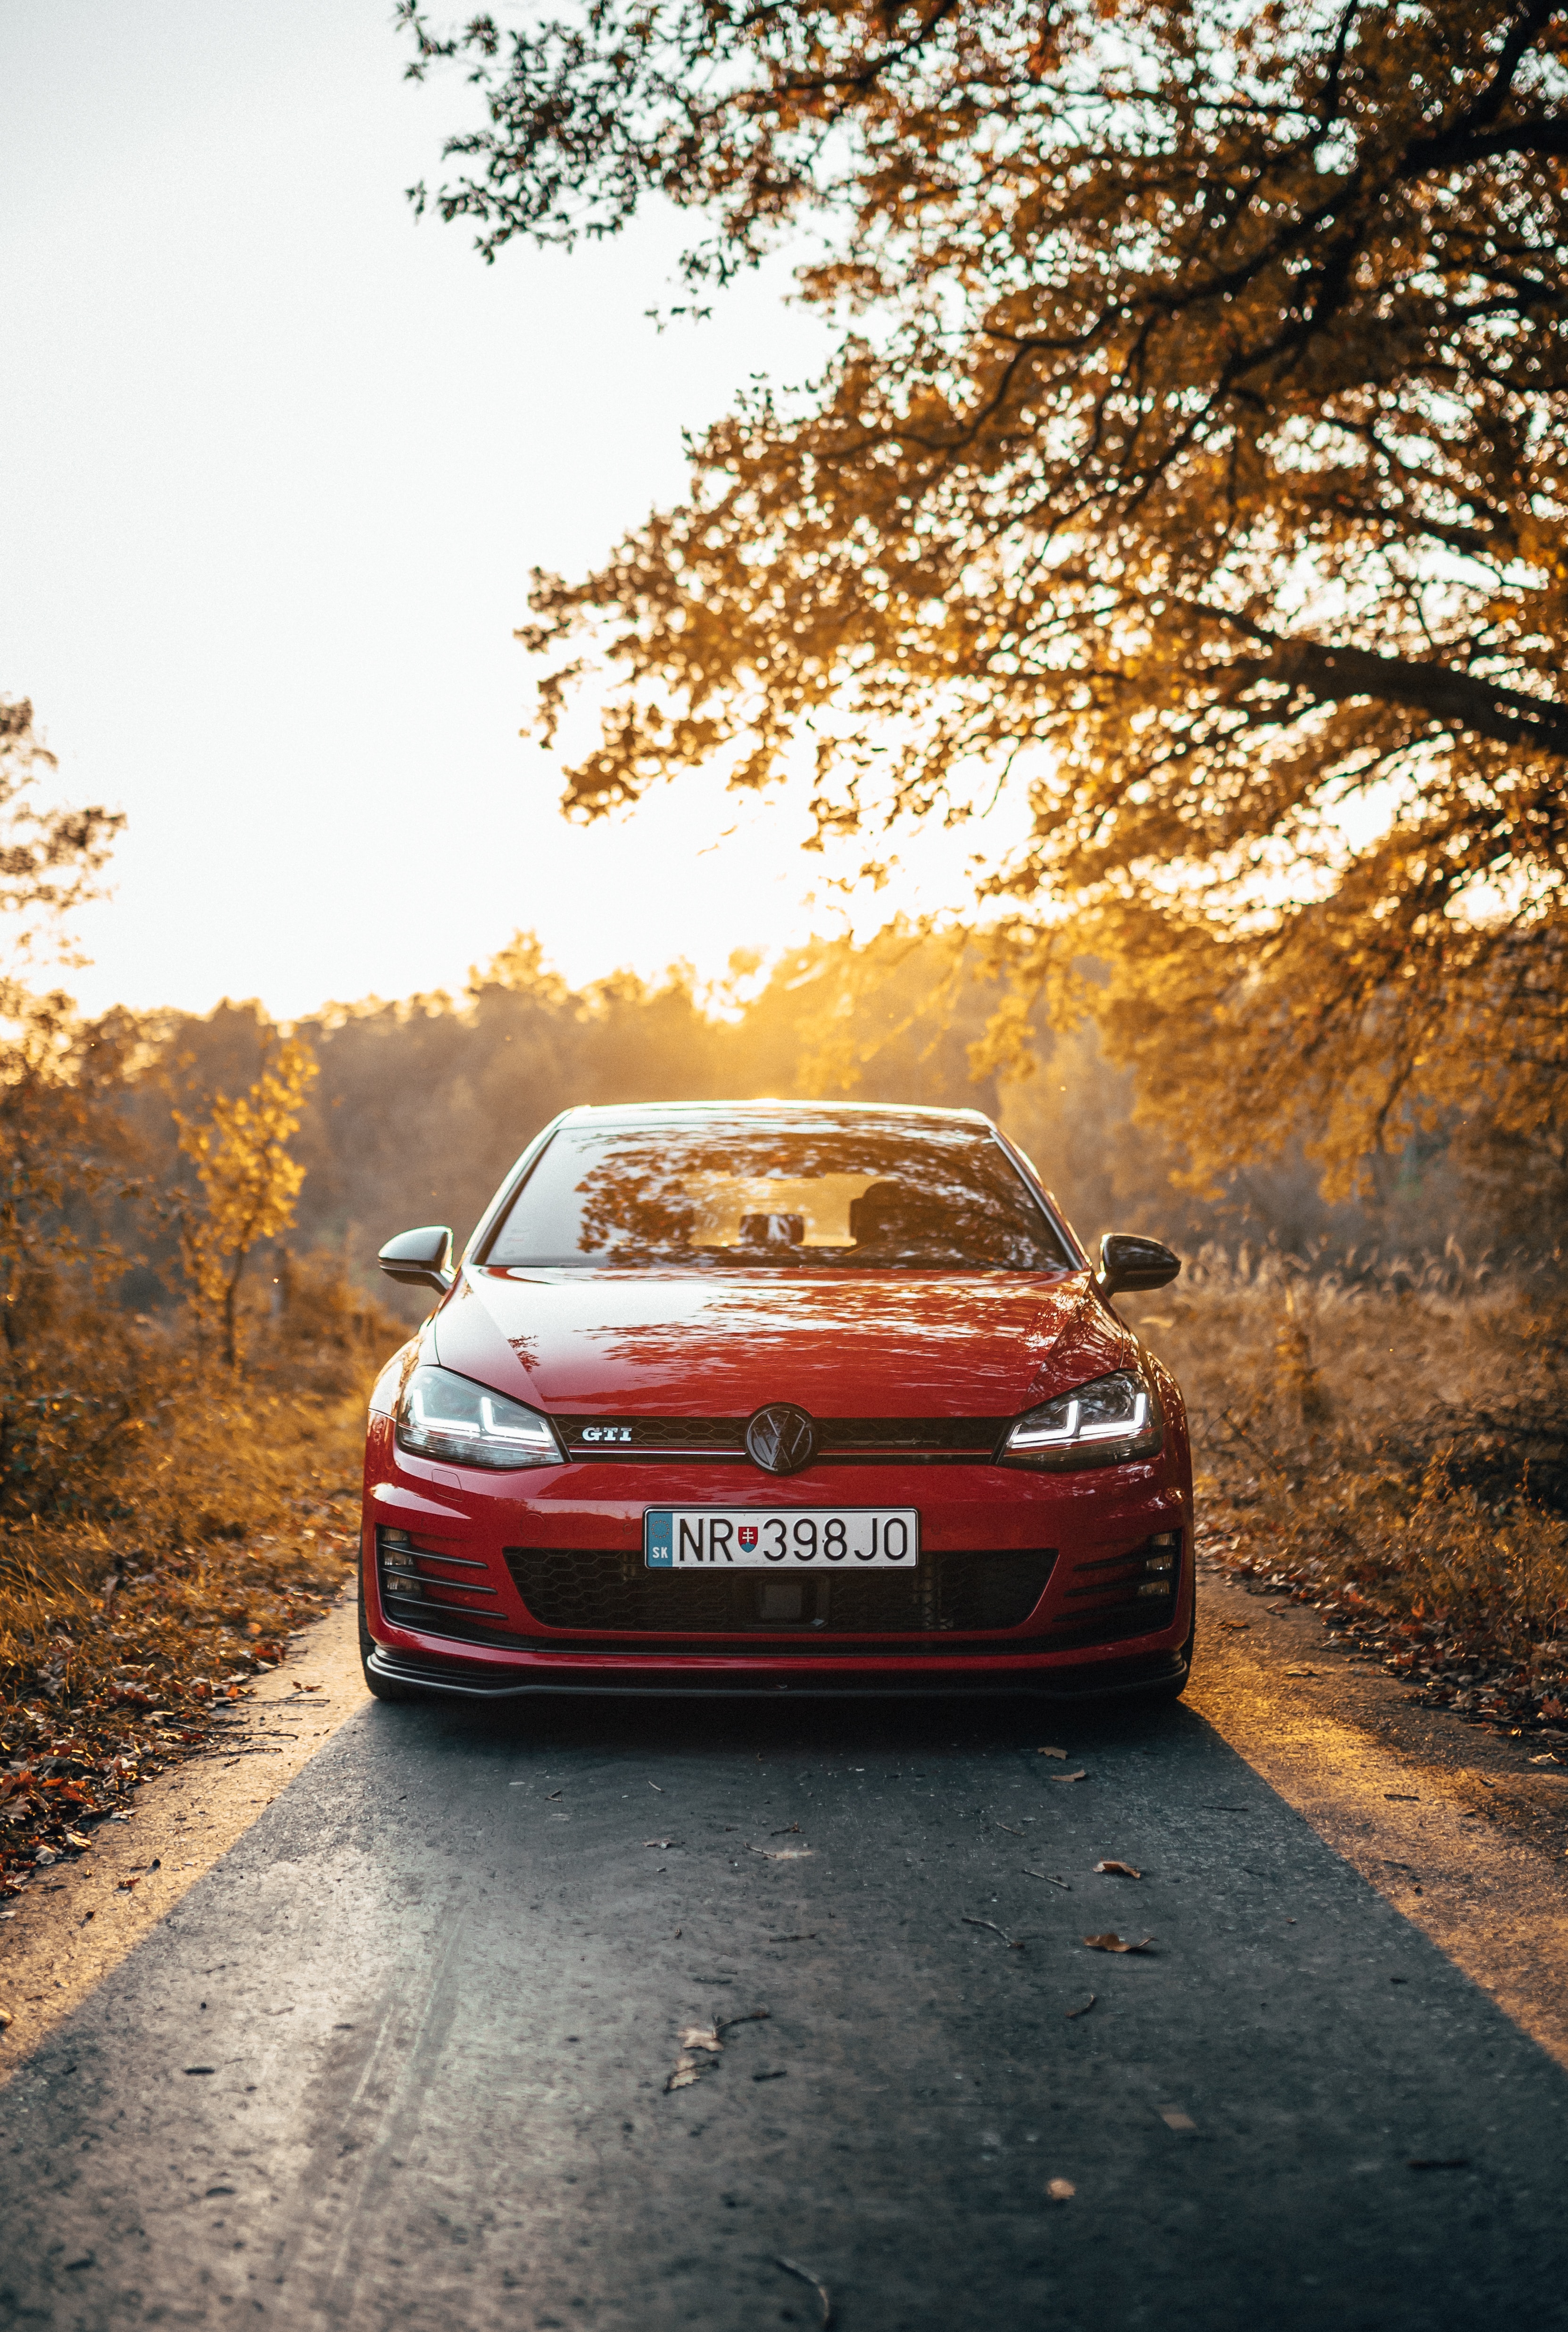 95125 free wallpaper 240x320 for phone, download images volkswagen golf gti, red, machine, front view 240x320 for mobile